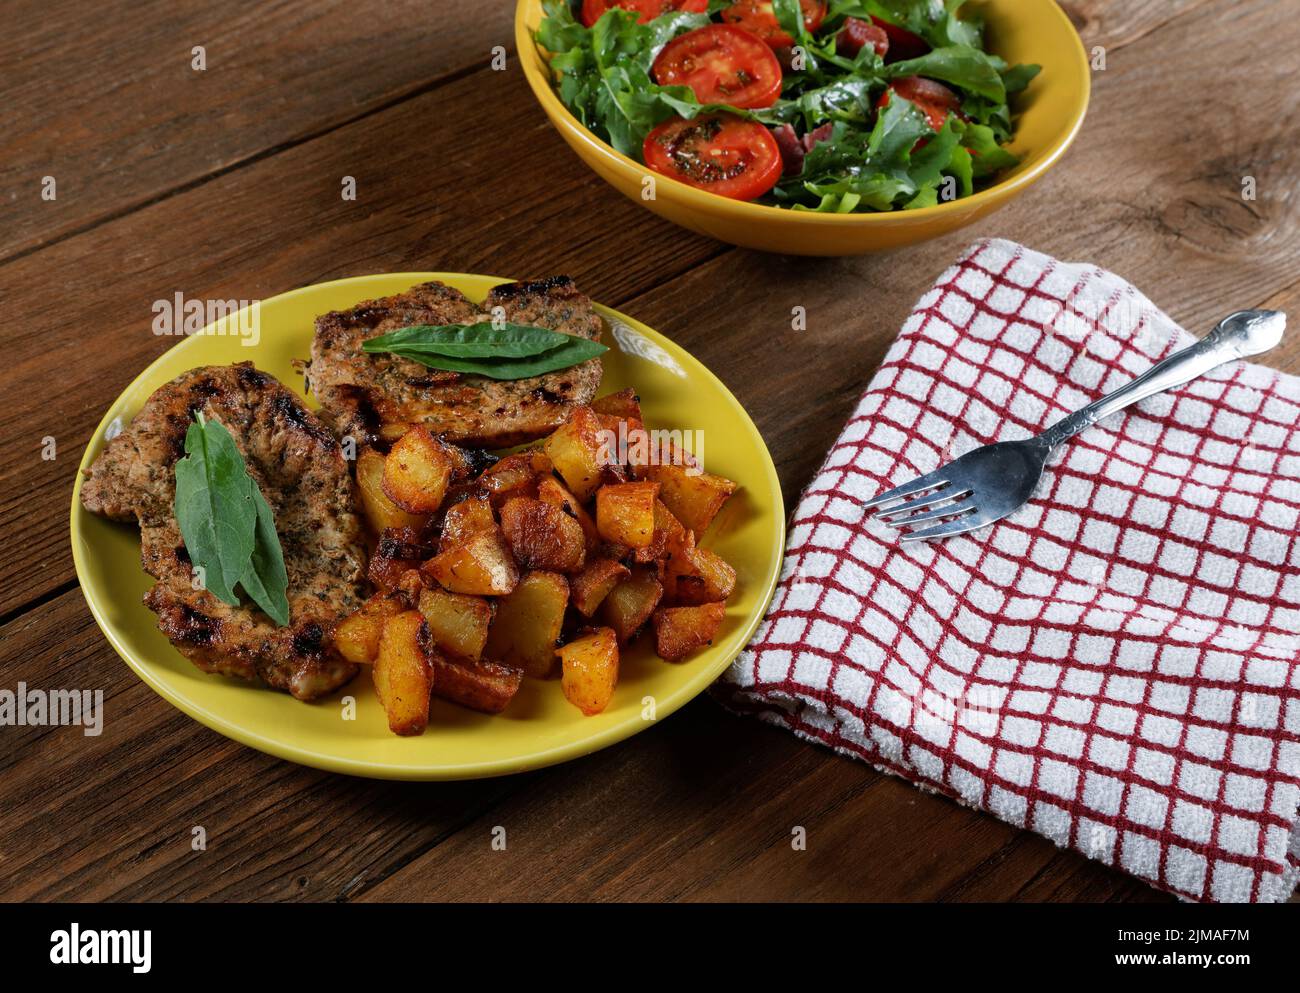 Fried potatoes with meat and a plate of salad on the table Stock Photo